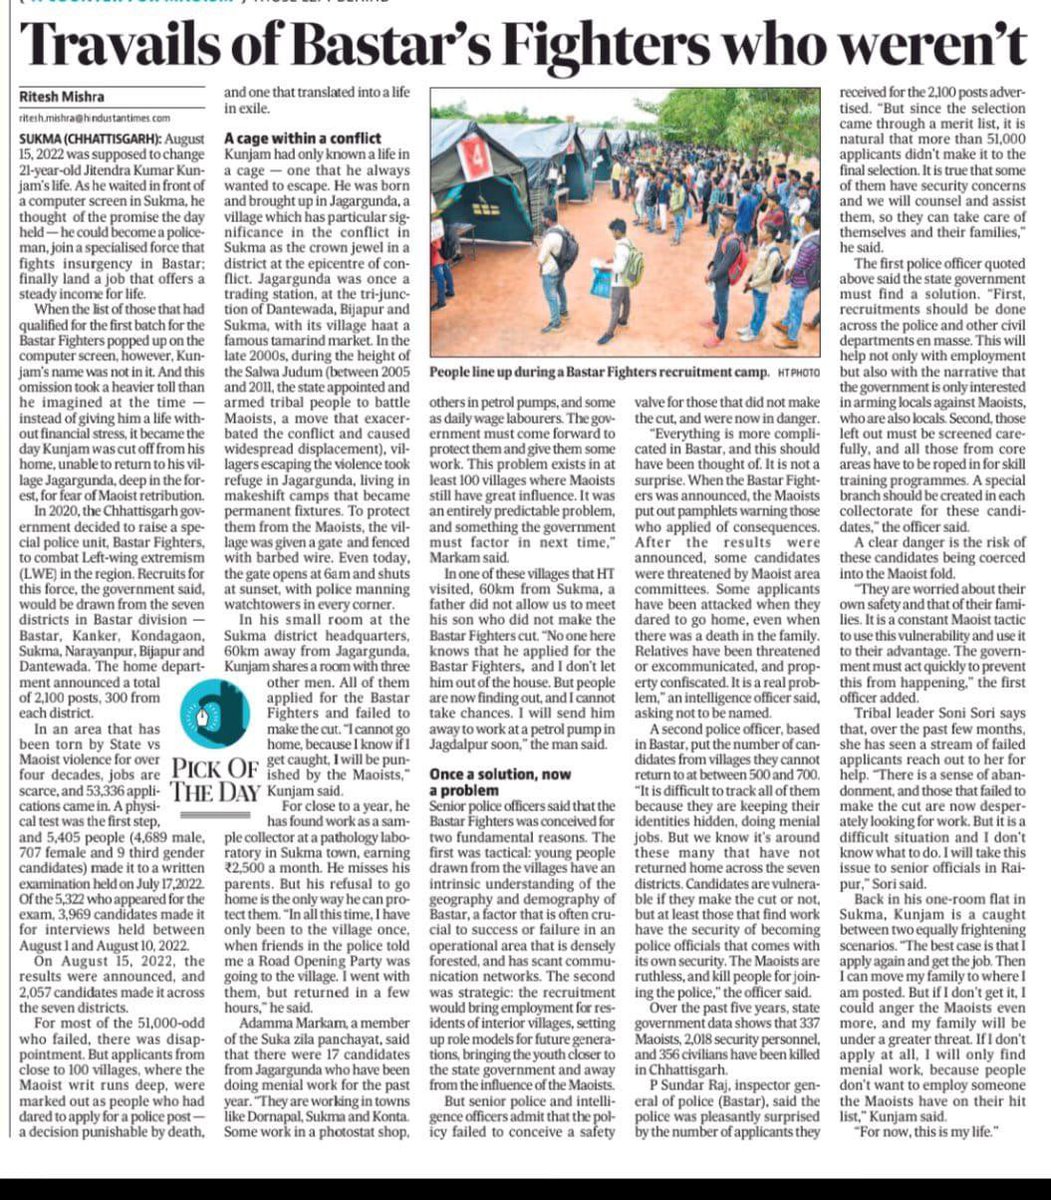 Out of 53000 applications 2057 finally selected as Bastar Fighters. Remaining 51000 odd youth finding it tough to return to their villages due to the life threat from the Maoists who are against the youth joining the force.

Reports Senior Journalist @riteshmishraht for @htTweets